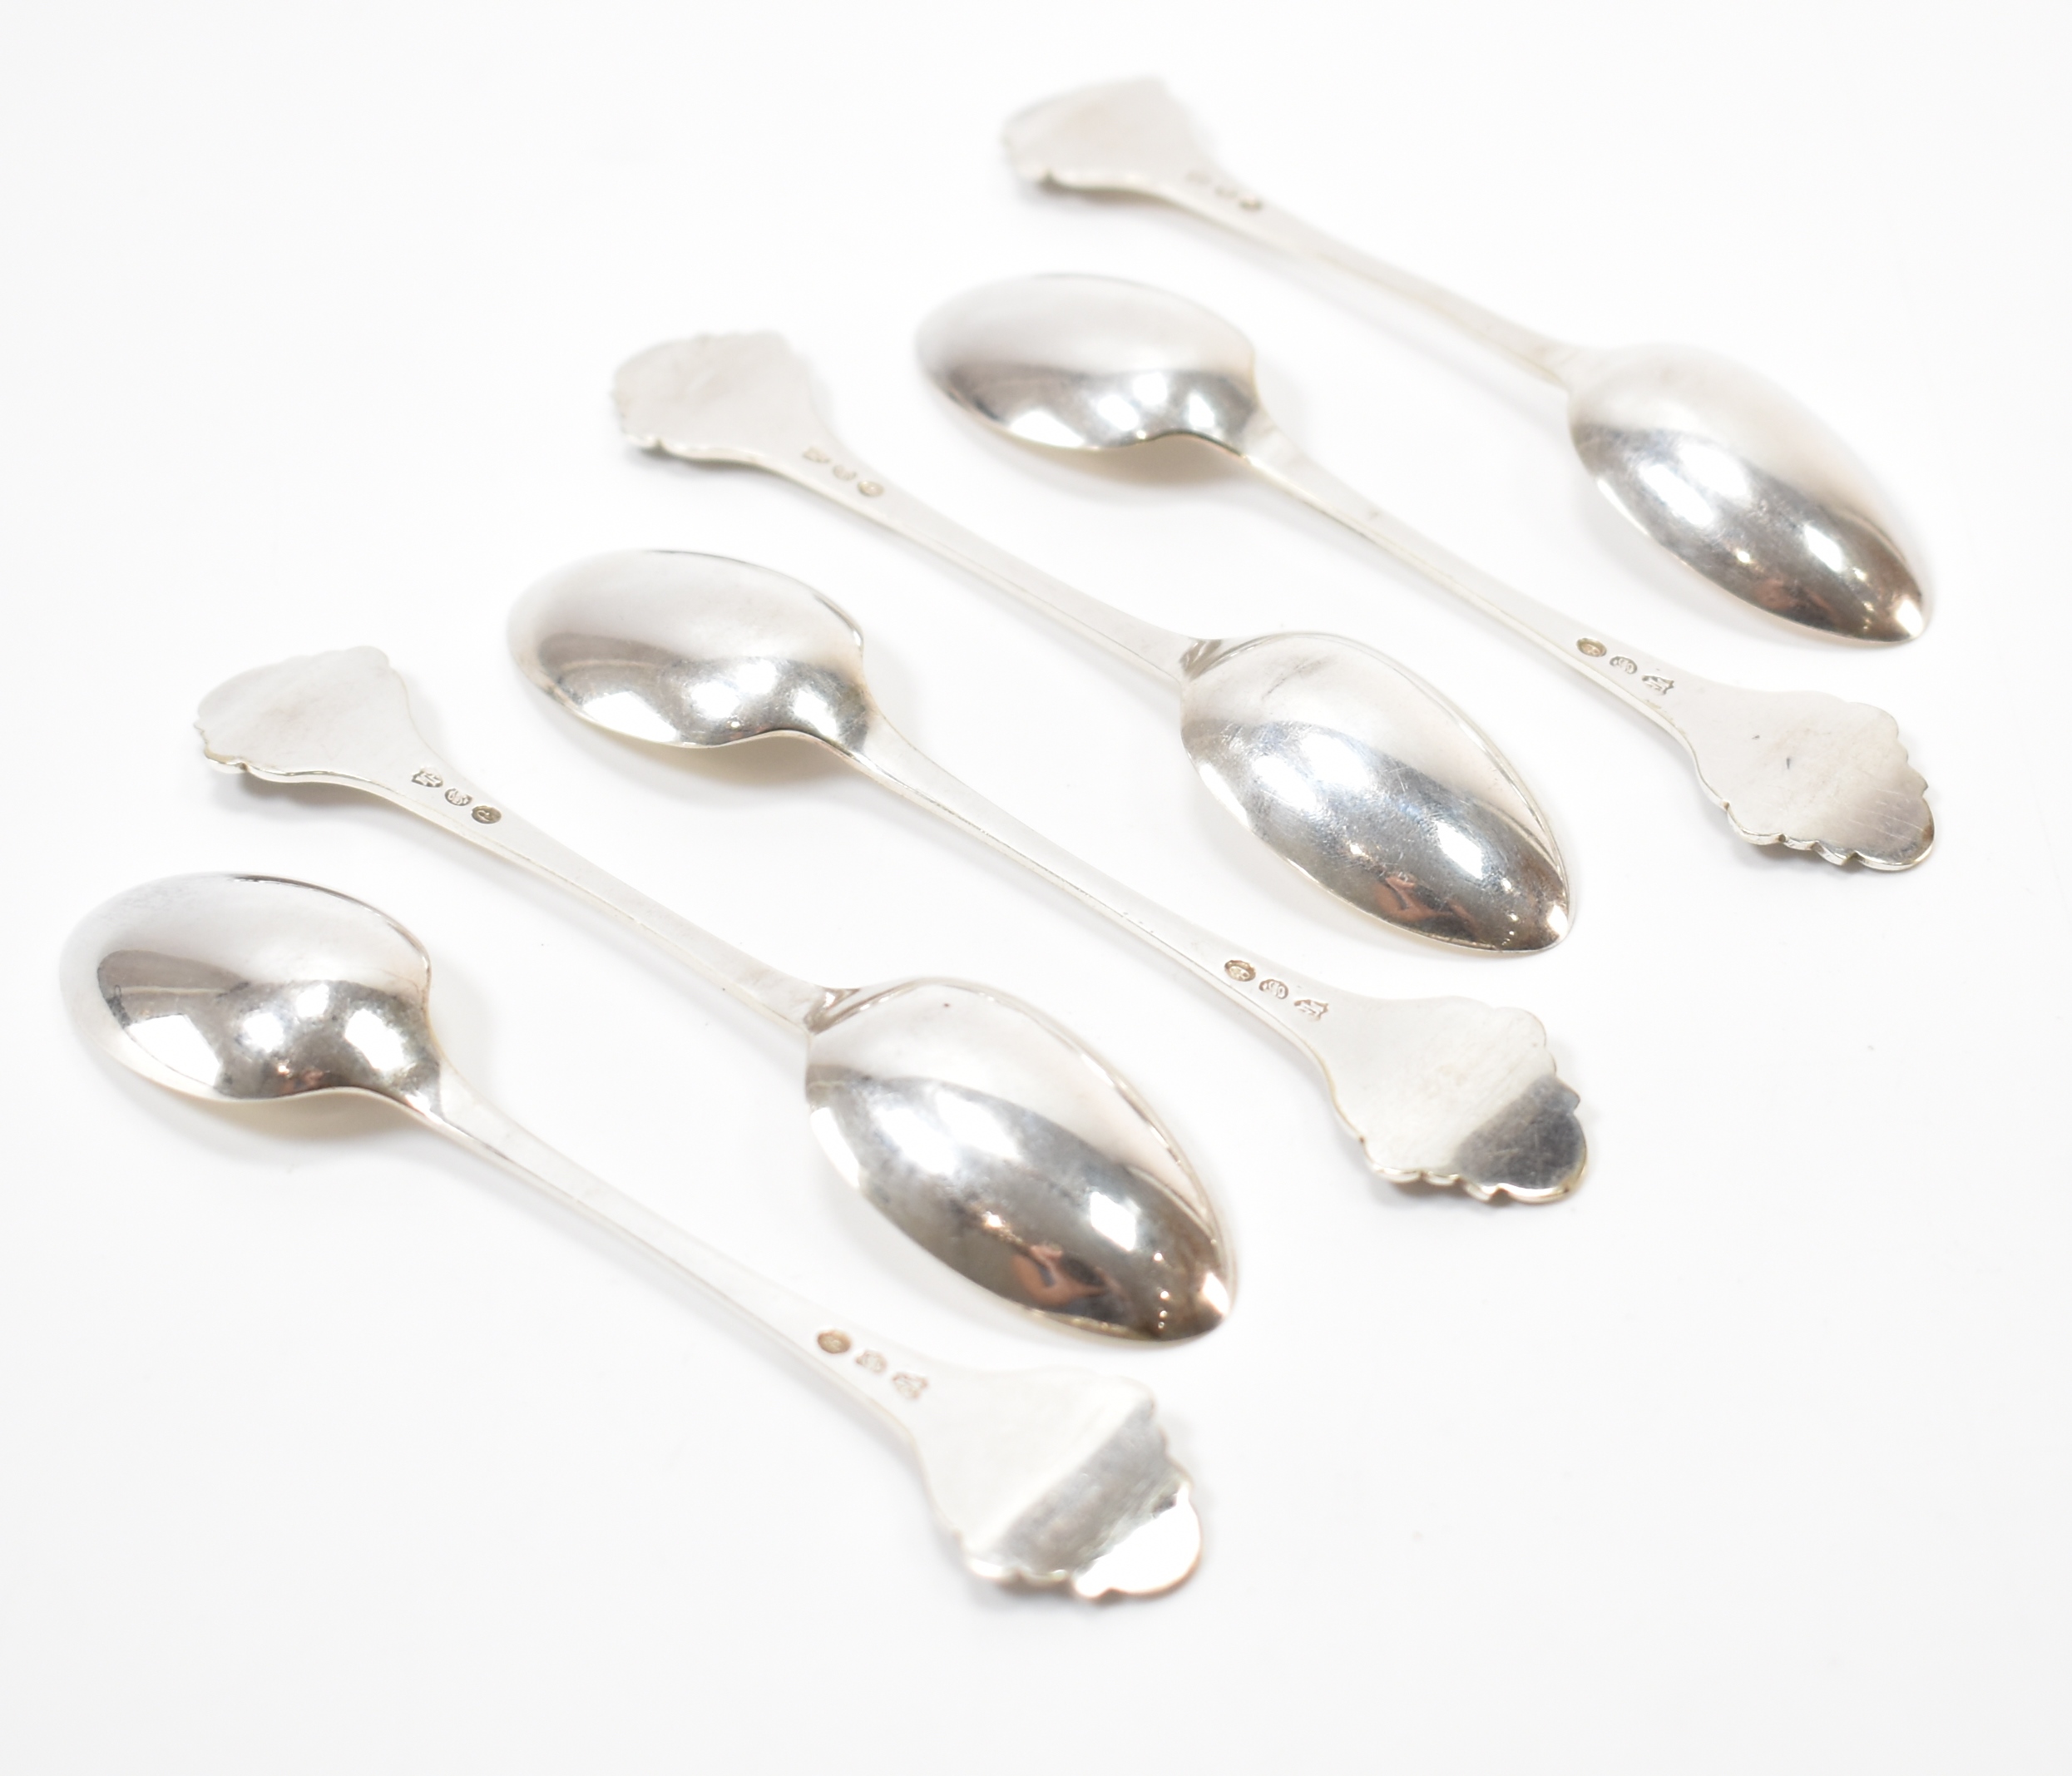 SIX VICTORIAN THOMAS PRIME SILVER PLATED TEA SPOONS - Image 4 of 5